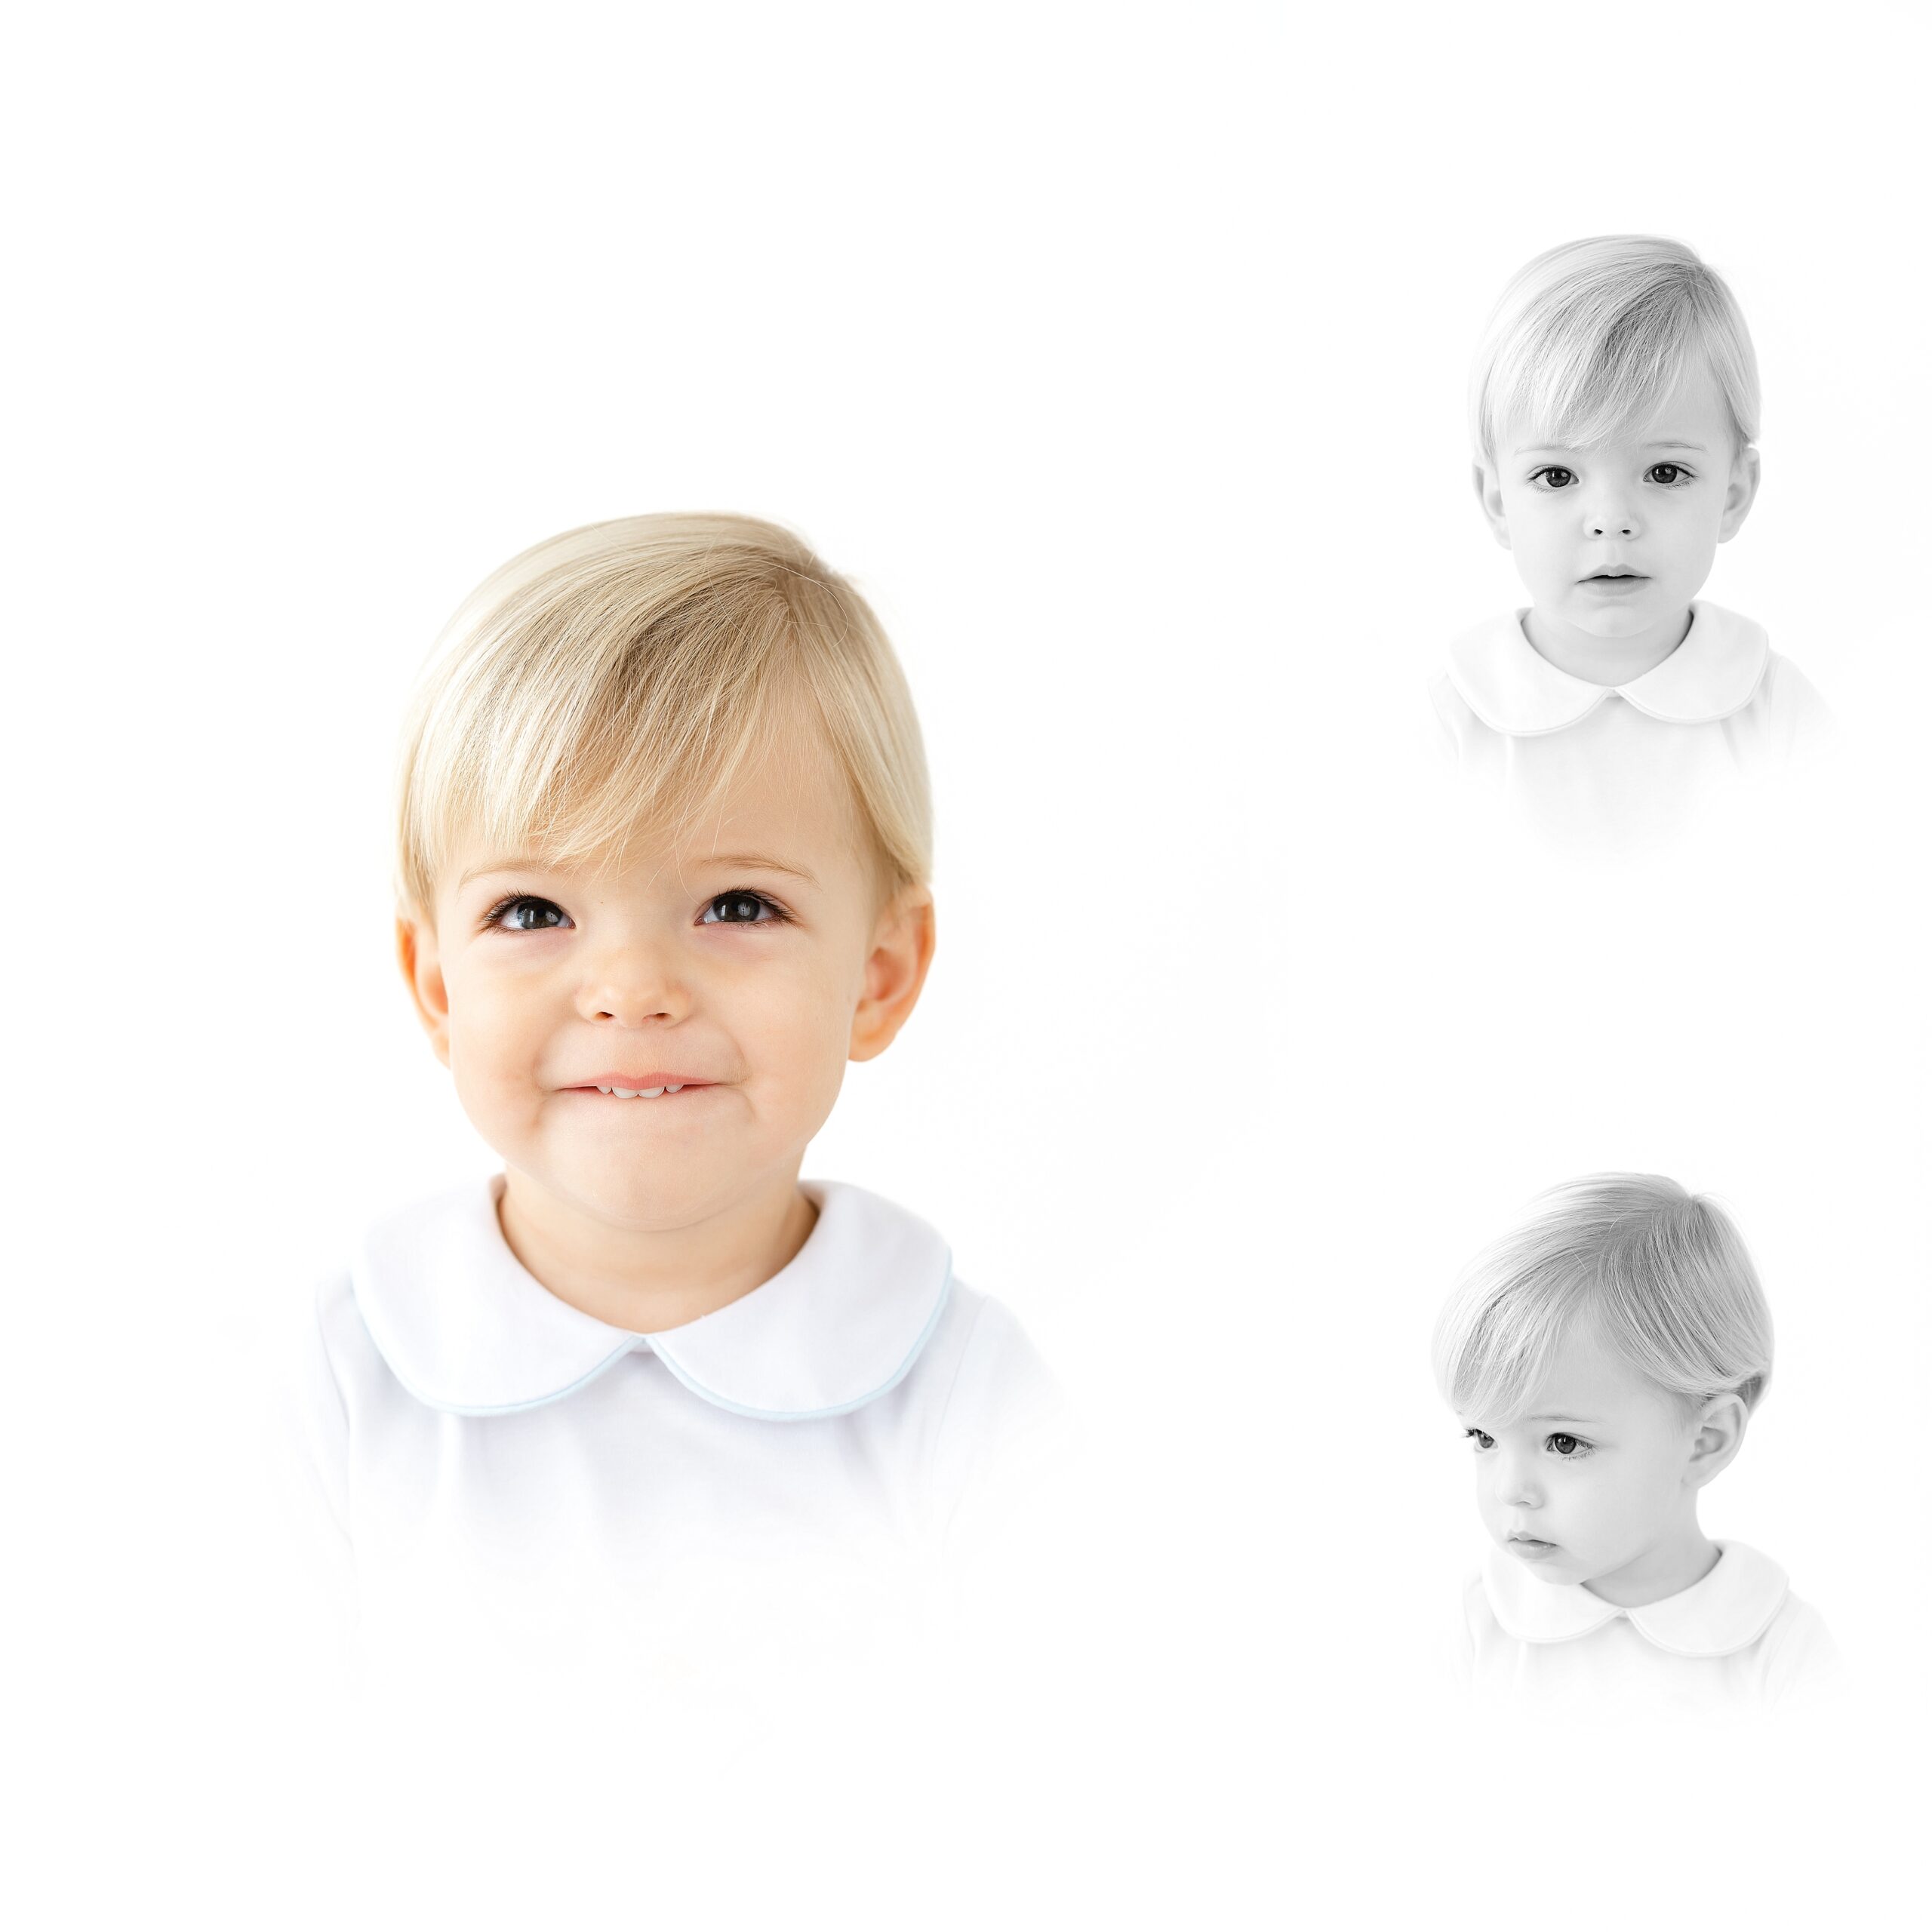 toddler boy with peter pan collar shirt for Atlanta Heirloom Photography sitting